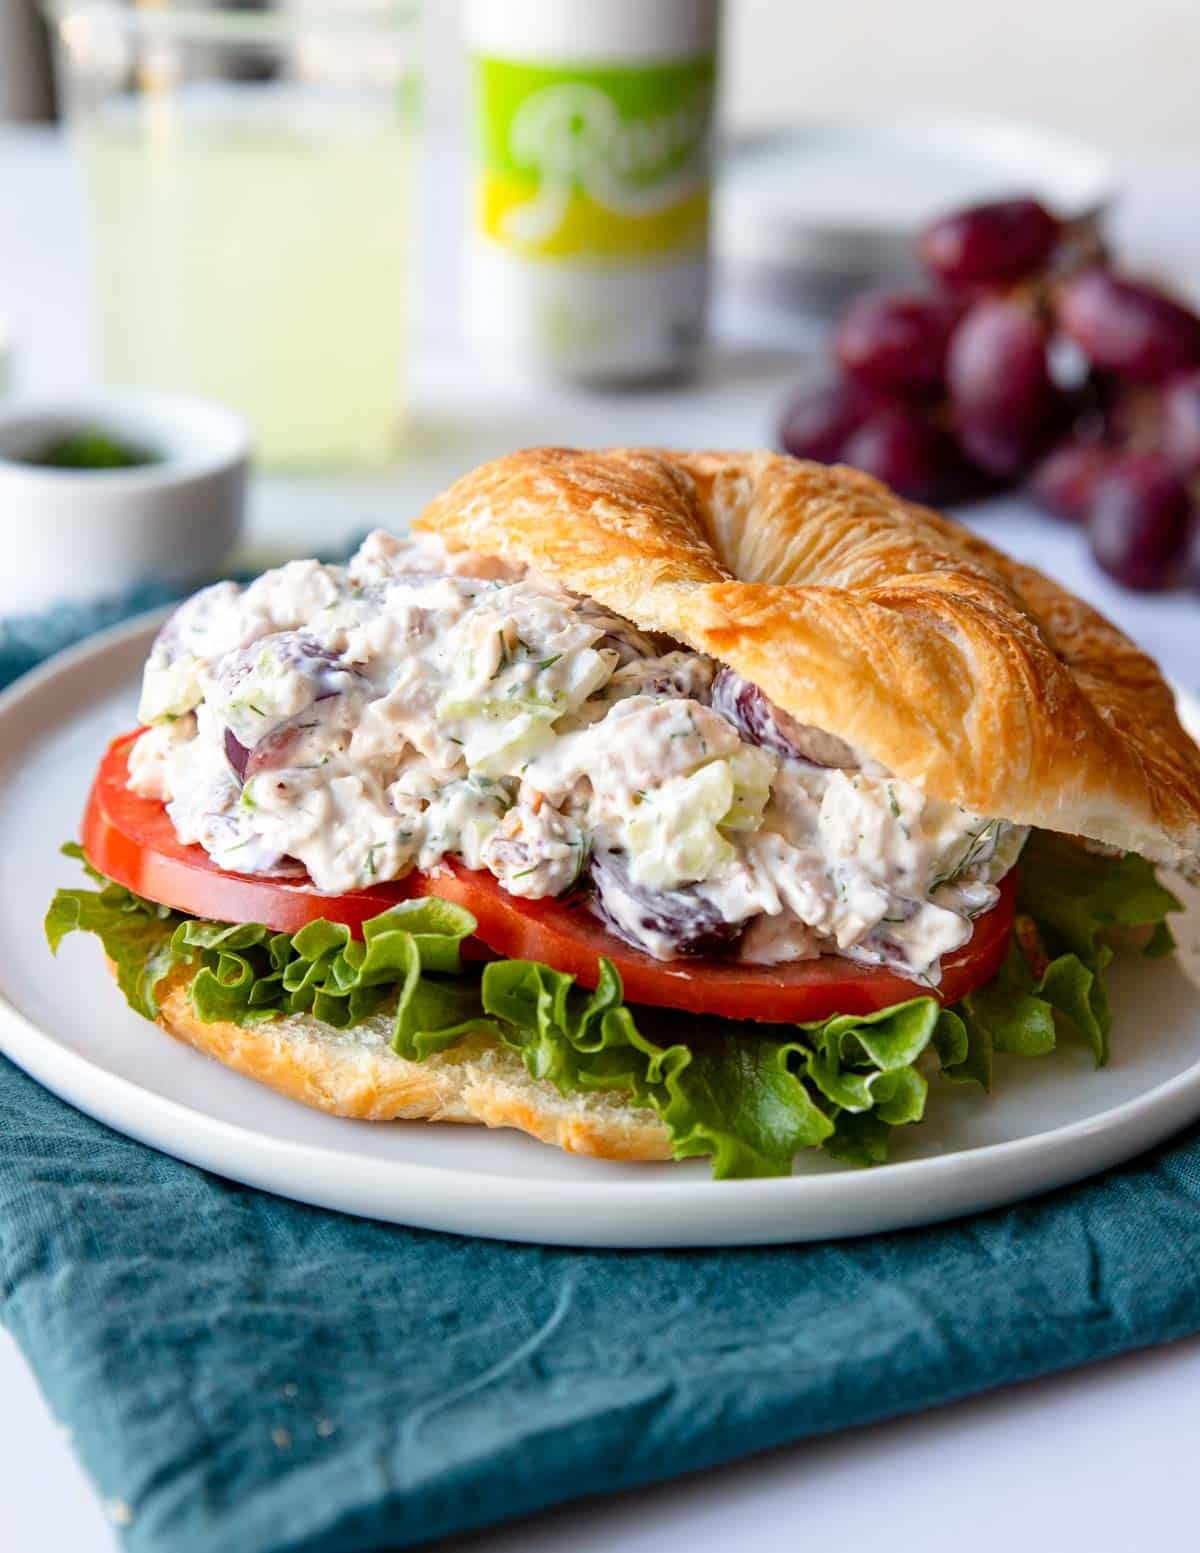 chicken salad sandwich with lettuce and thick cut tomatoes